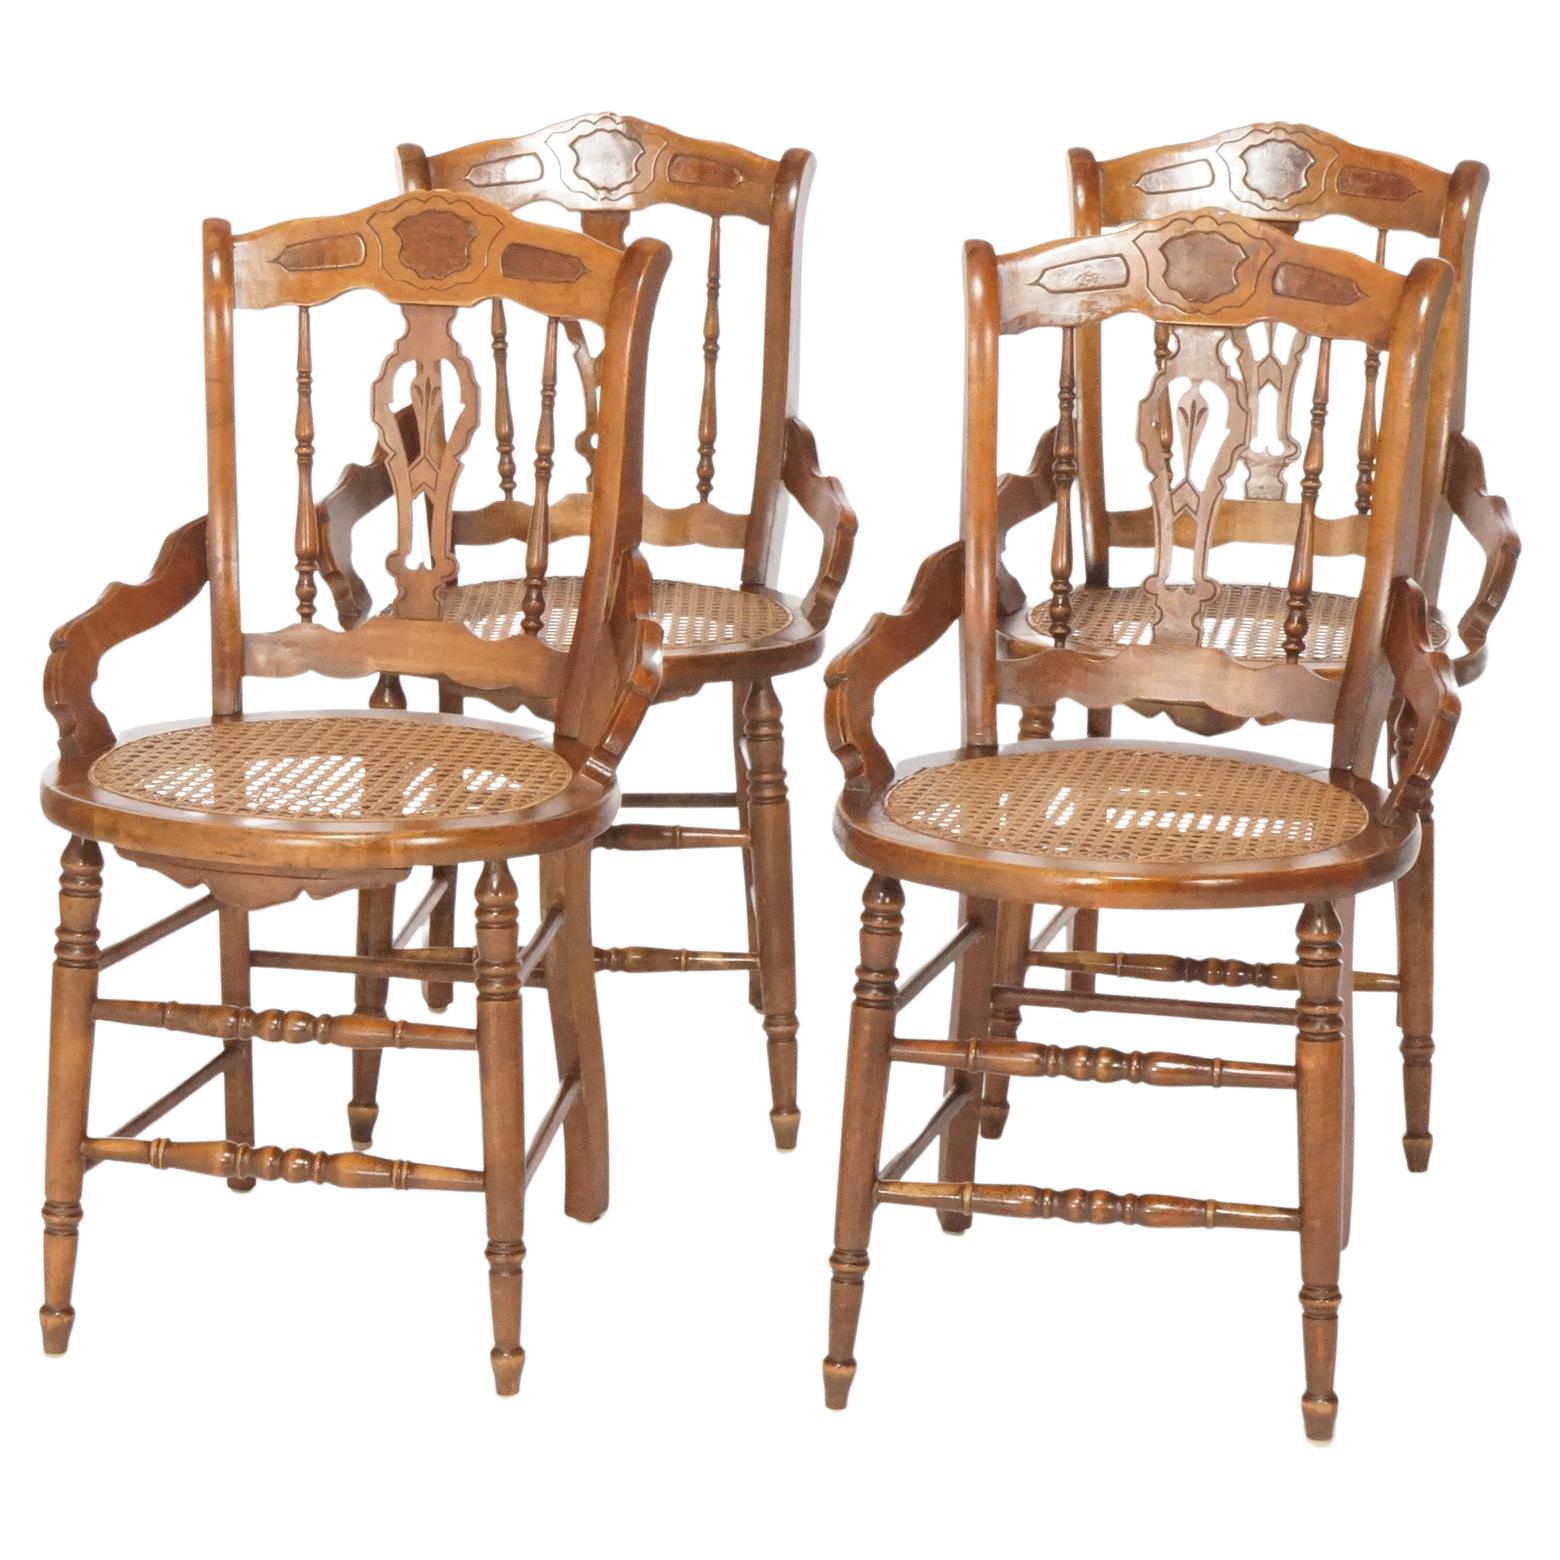 Antique Set of Four Victorian Walnut, Burl & Cane Seat Dining Chairs, Circa 1890 For Sale